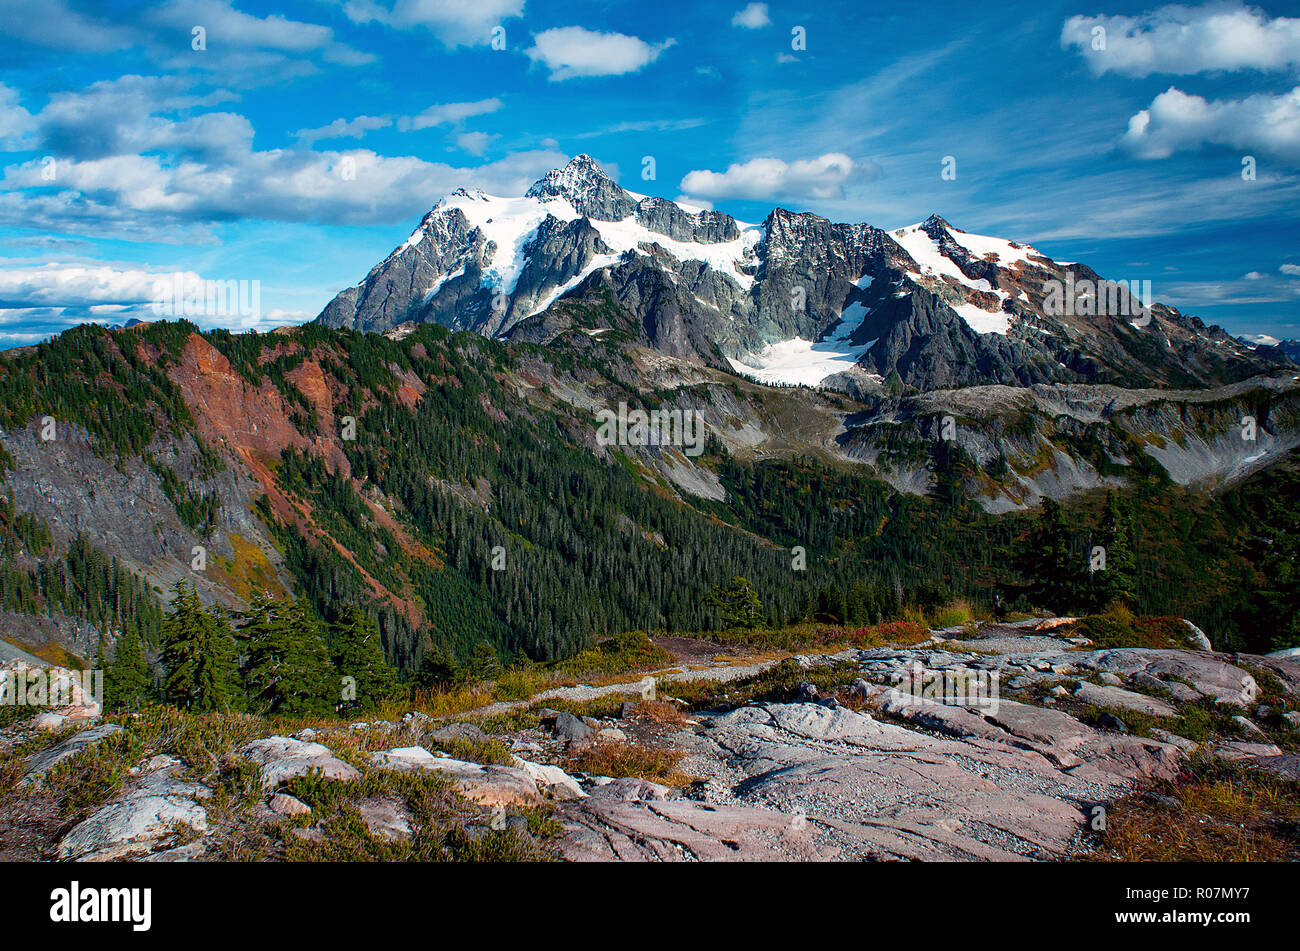 September 27, 2018: The glaciers of Mount Shuksan, Mount Baker Wilderness, Snoqualmie National Forest, Washington, USA. Stock Photo